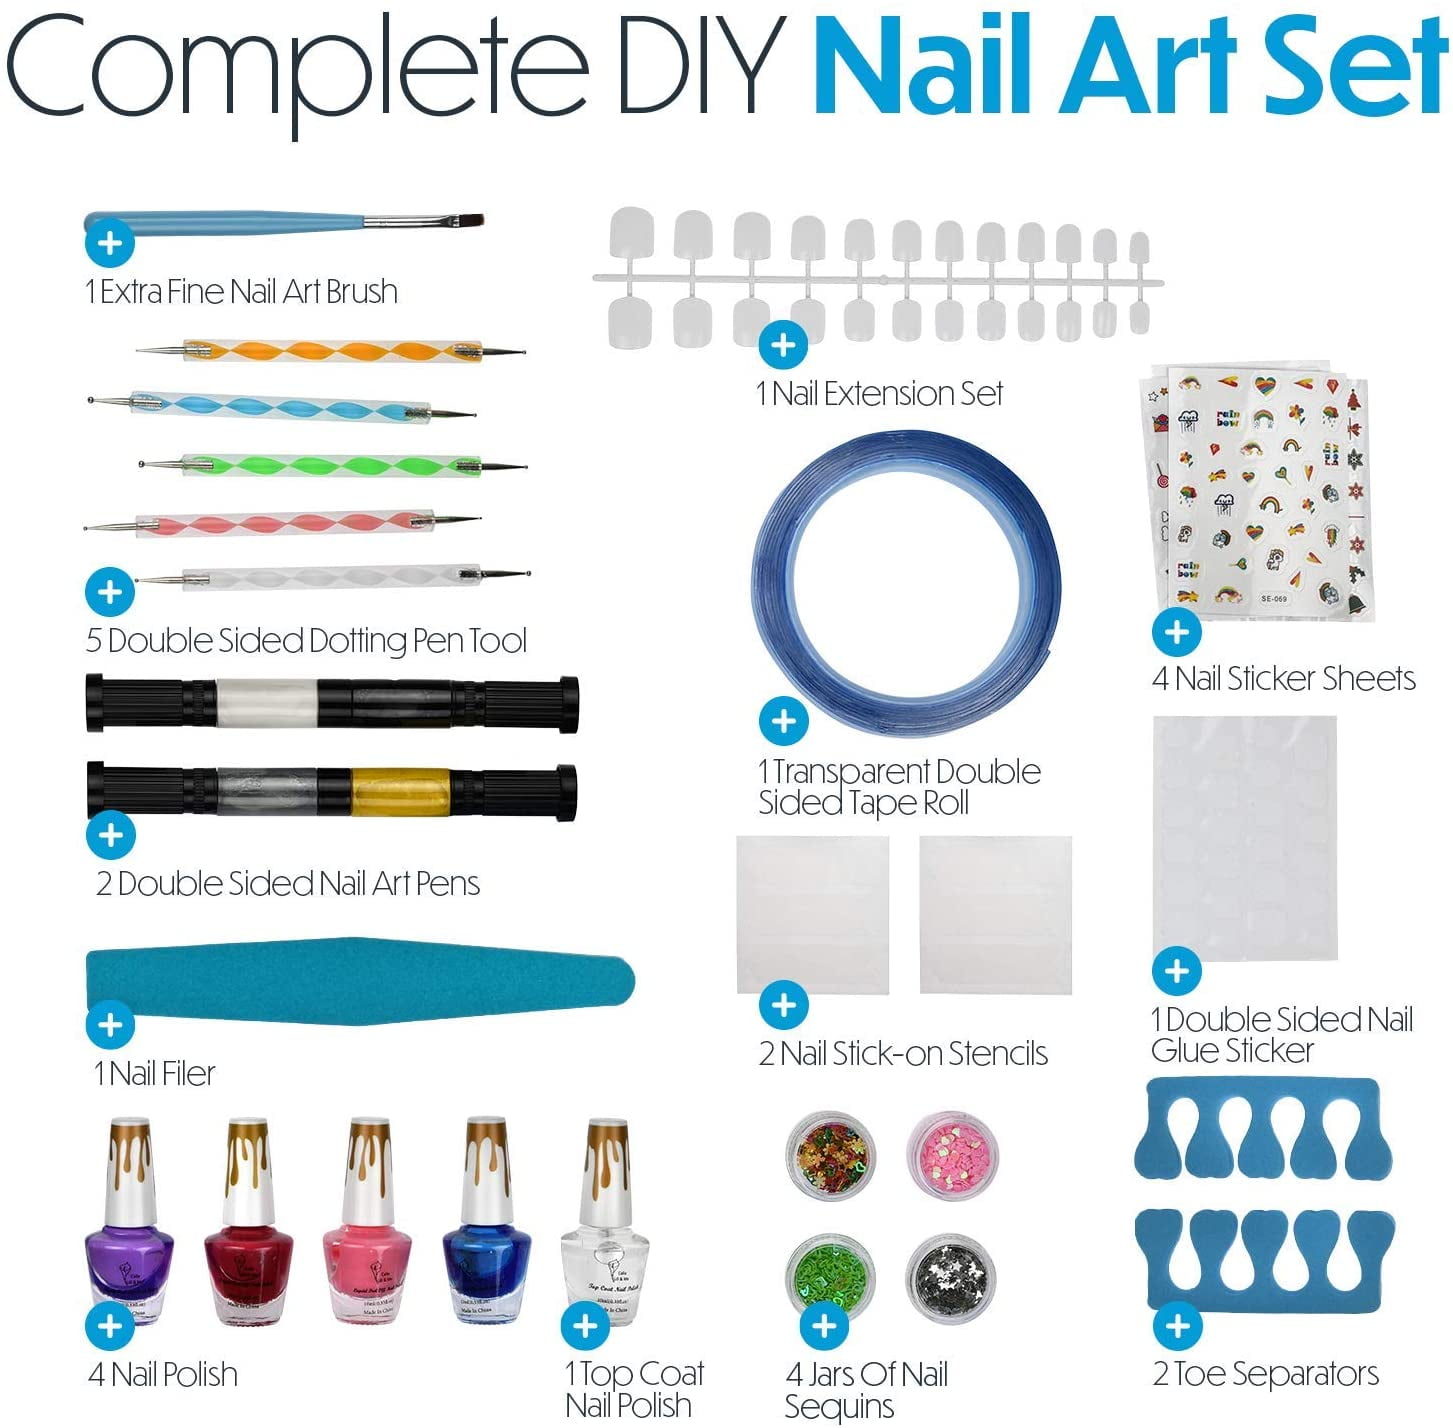 Nail Art Studio for Girls - Nail Polish Kit for Kids Ages 7-12 Years Old -  Girl Gifts Ideas - Girls Nails Gift Set - Cool Girly Stuff - Polish, Pens